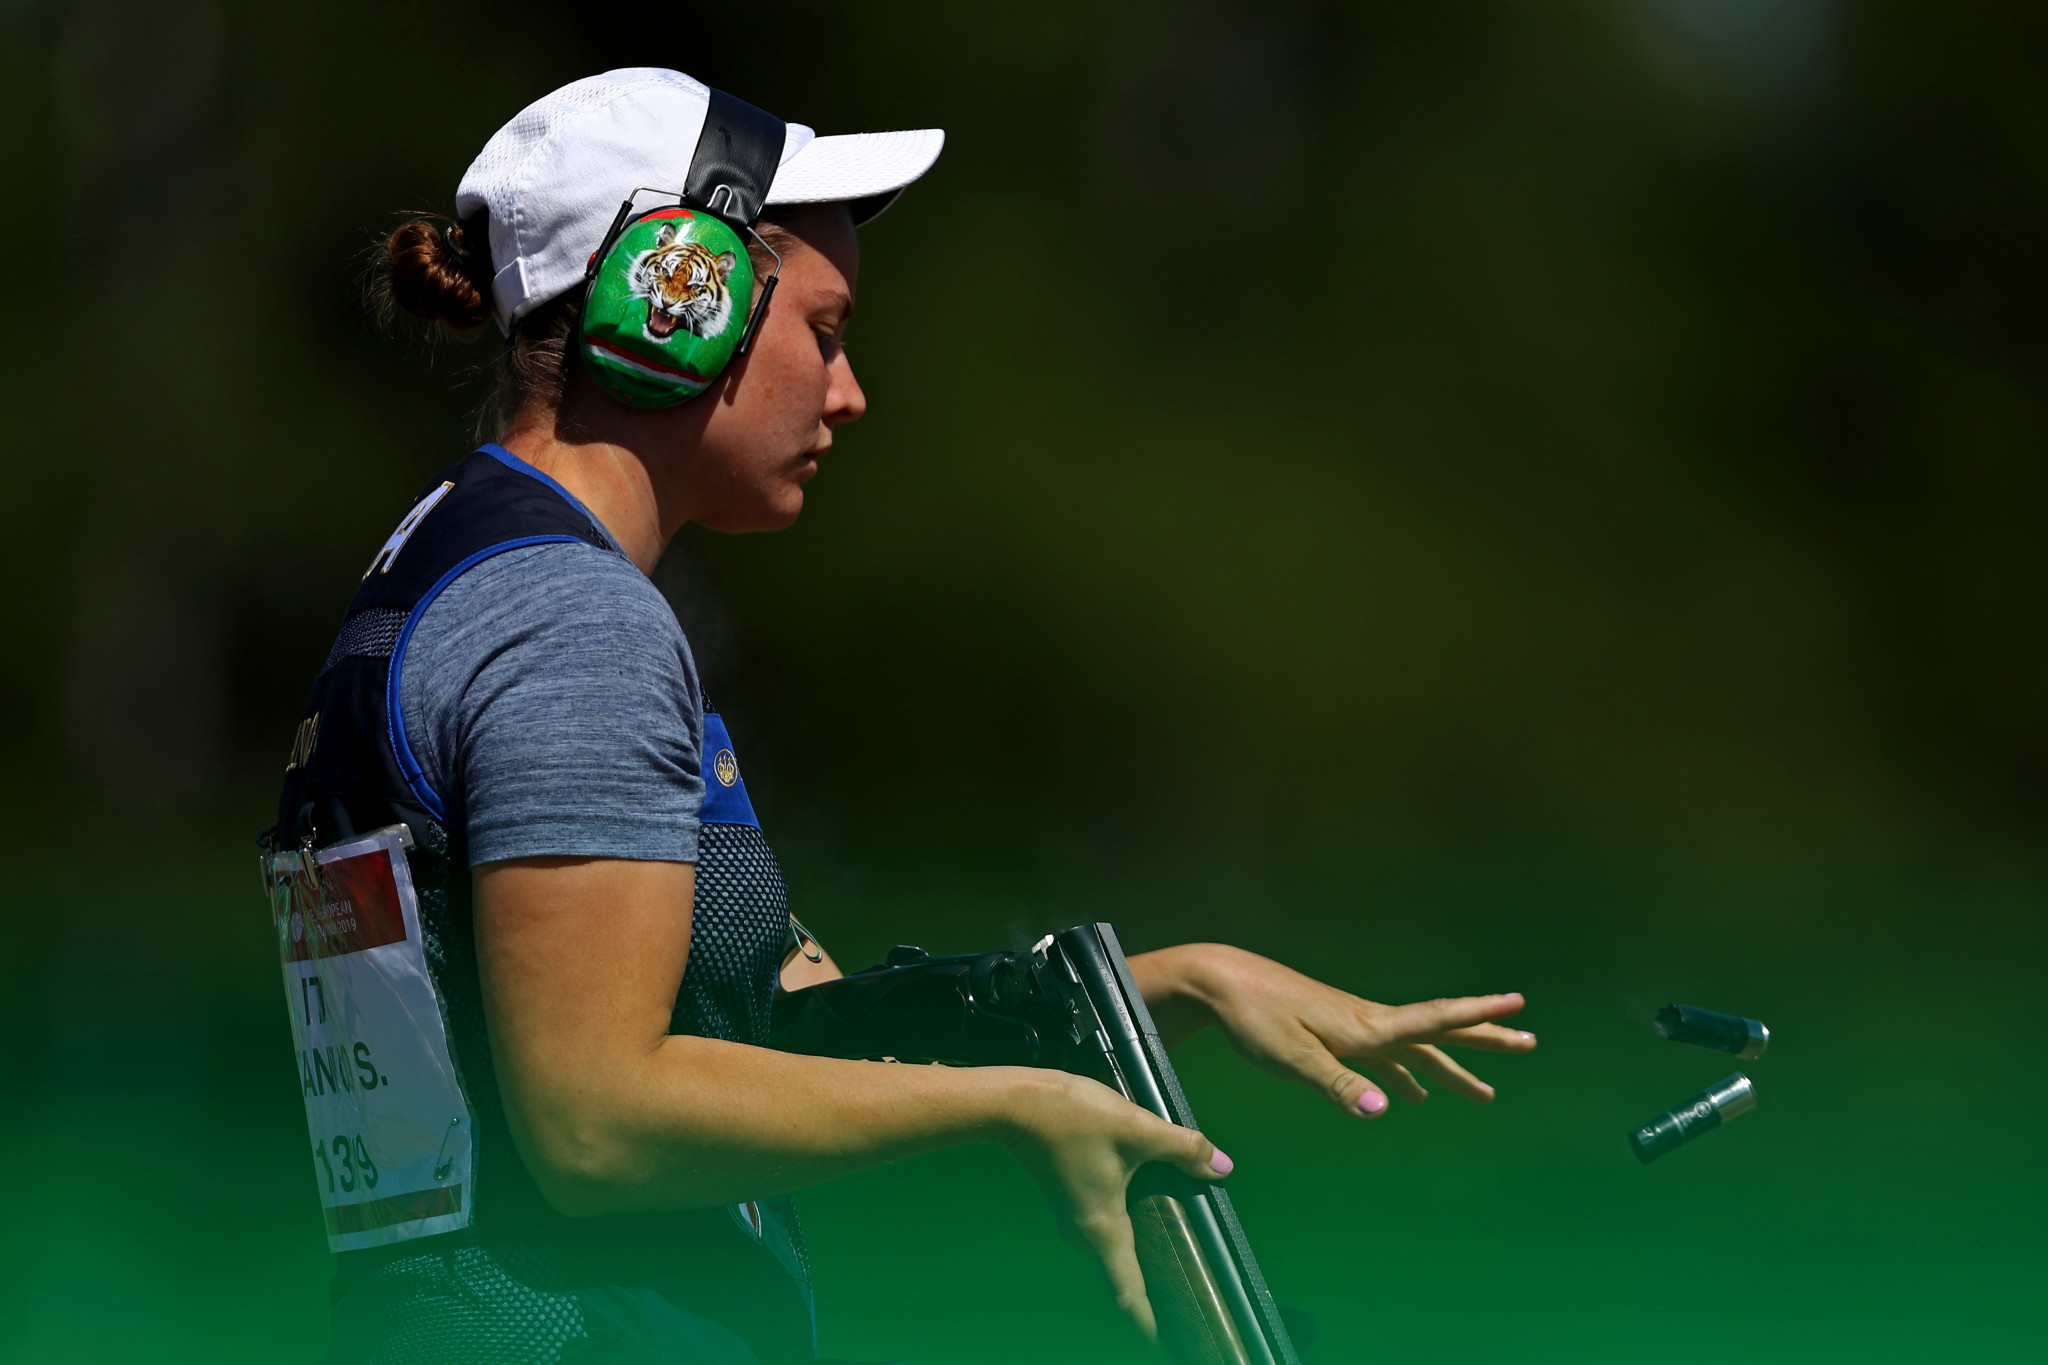 Double trap success for Italy at ISSF World Cup in Osijek